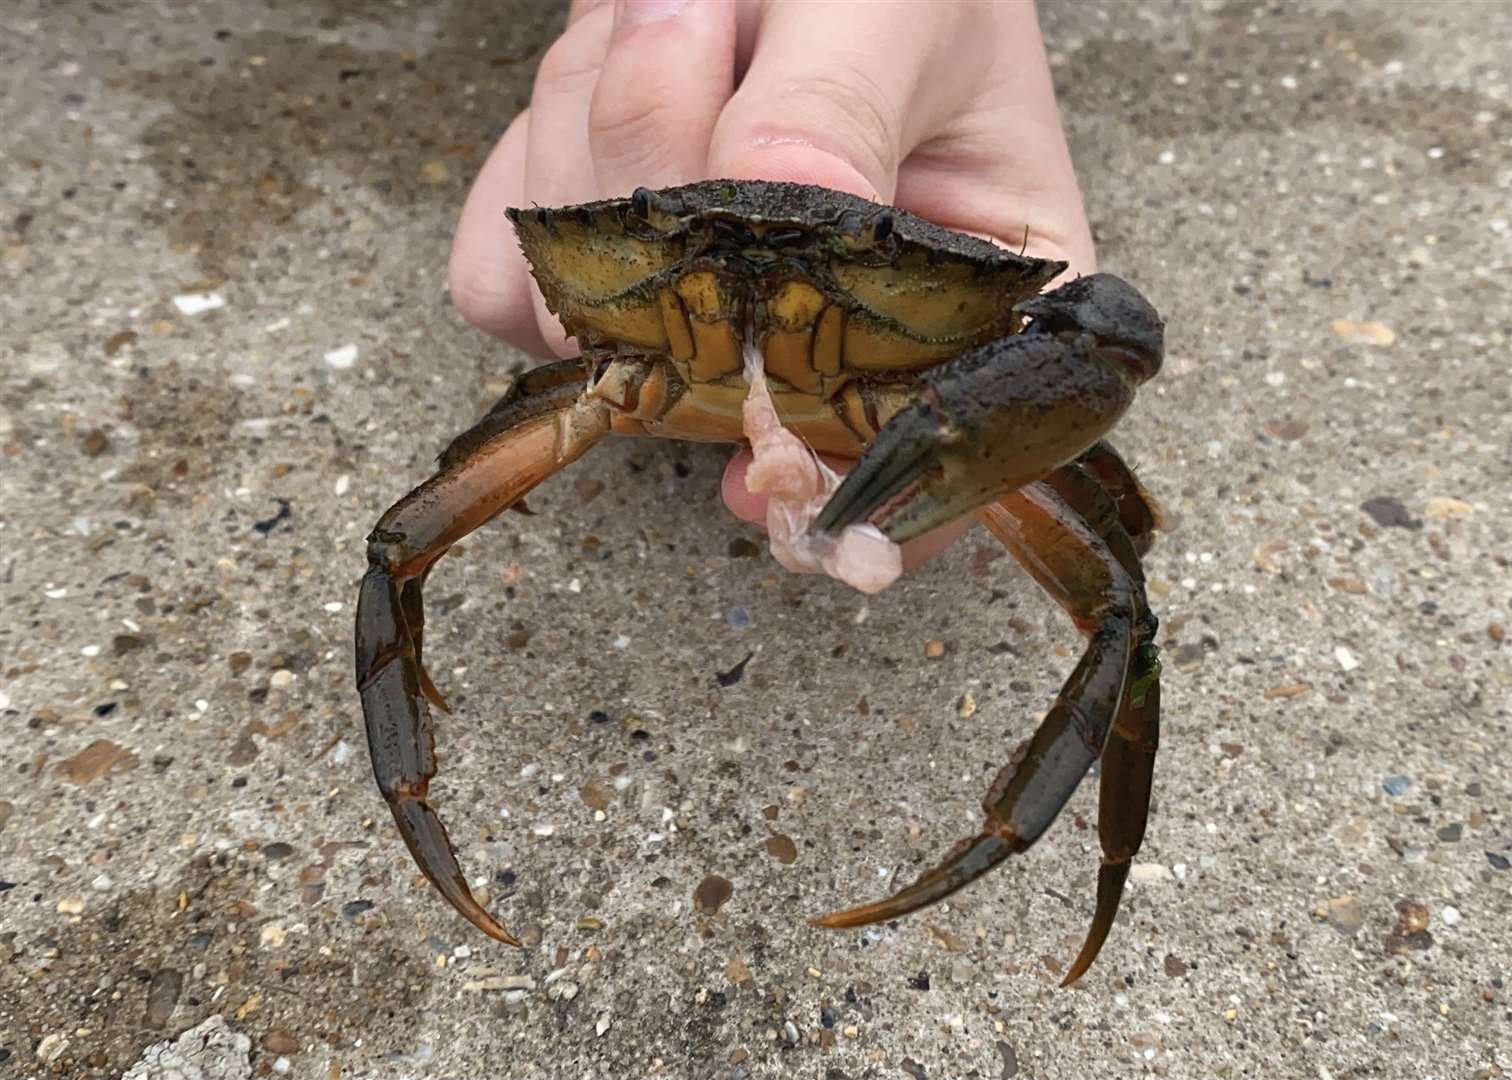 Crabs are scavengers and love raw bacon